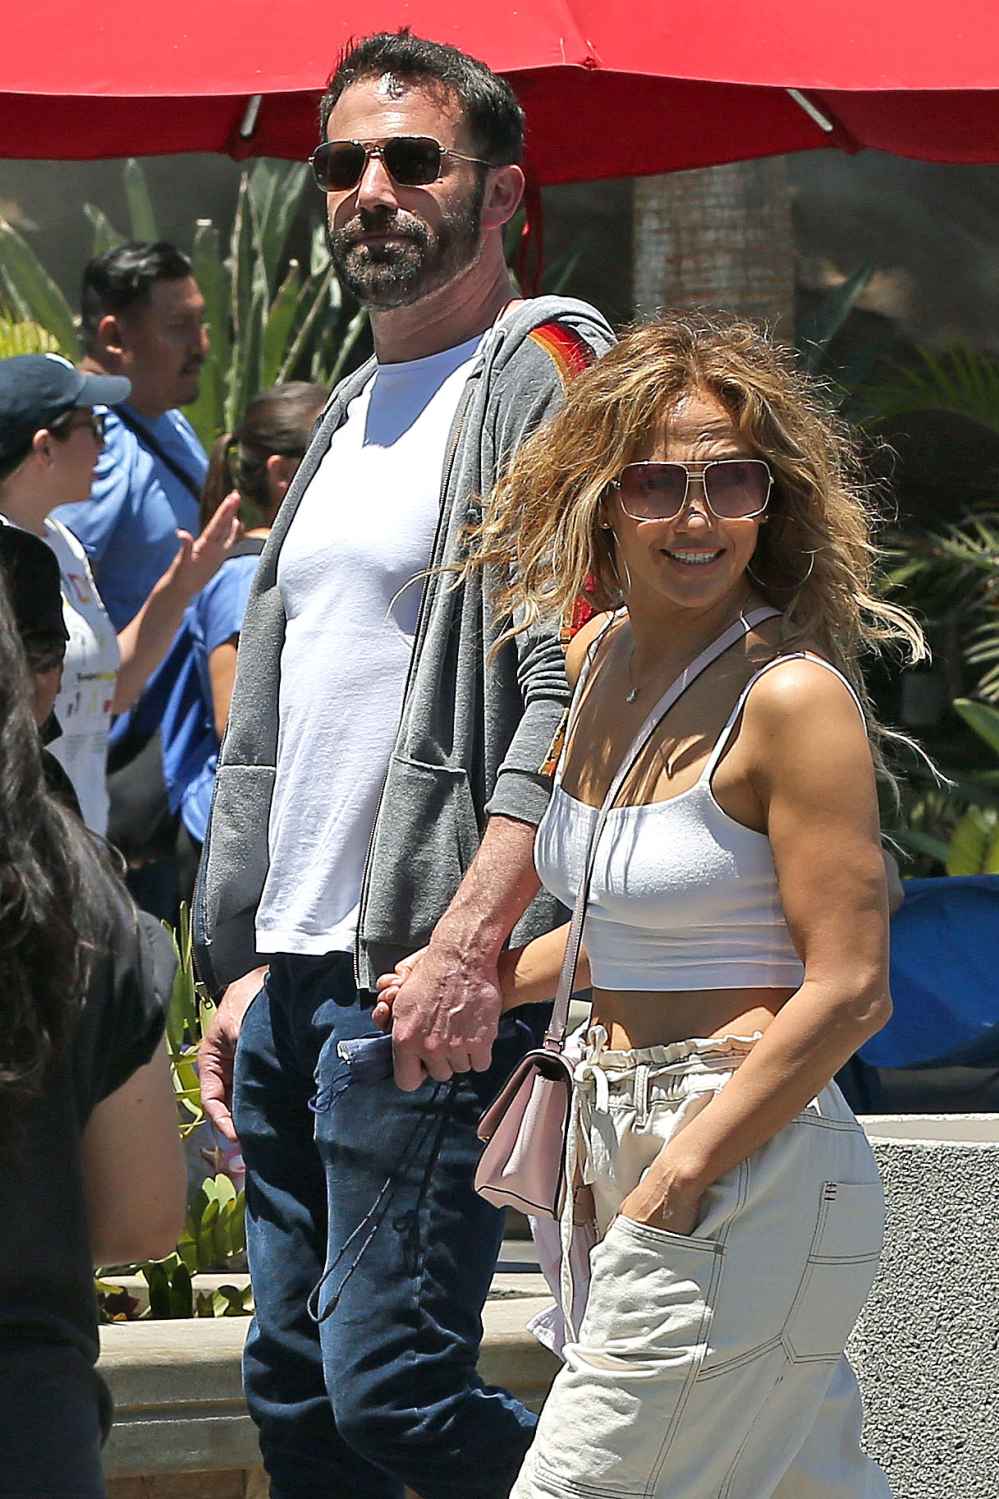 Ben Affleck Pays Jennifer Lopez a Visit on Set of Upcoming Project in Los Angeles 2 Universal Studios Holding Hands